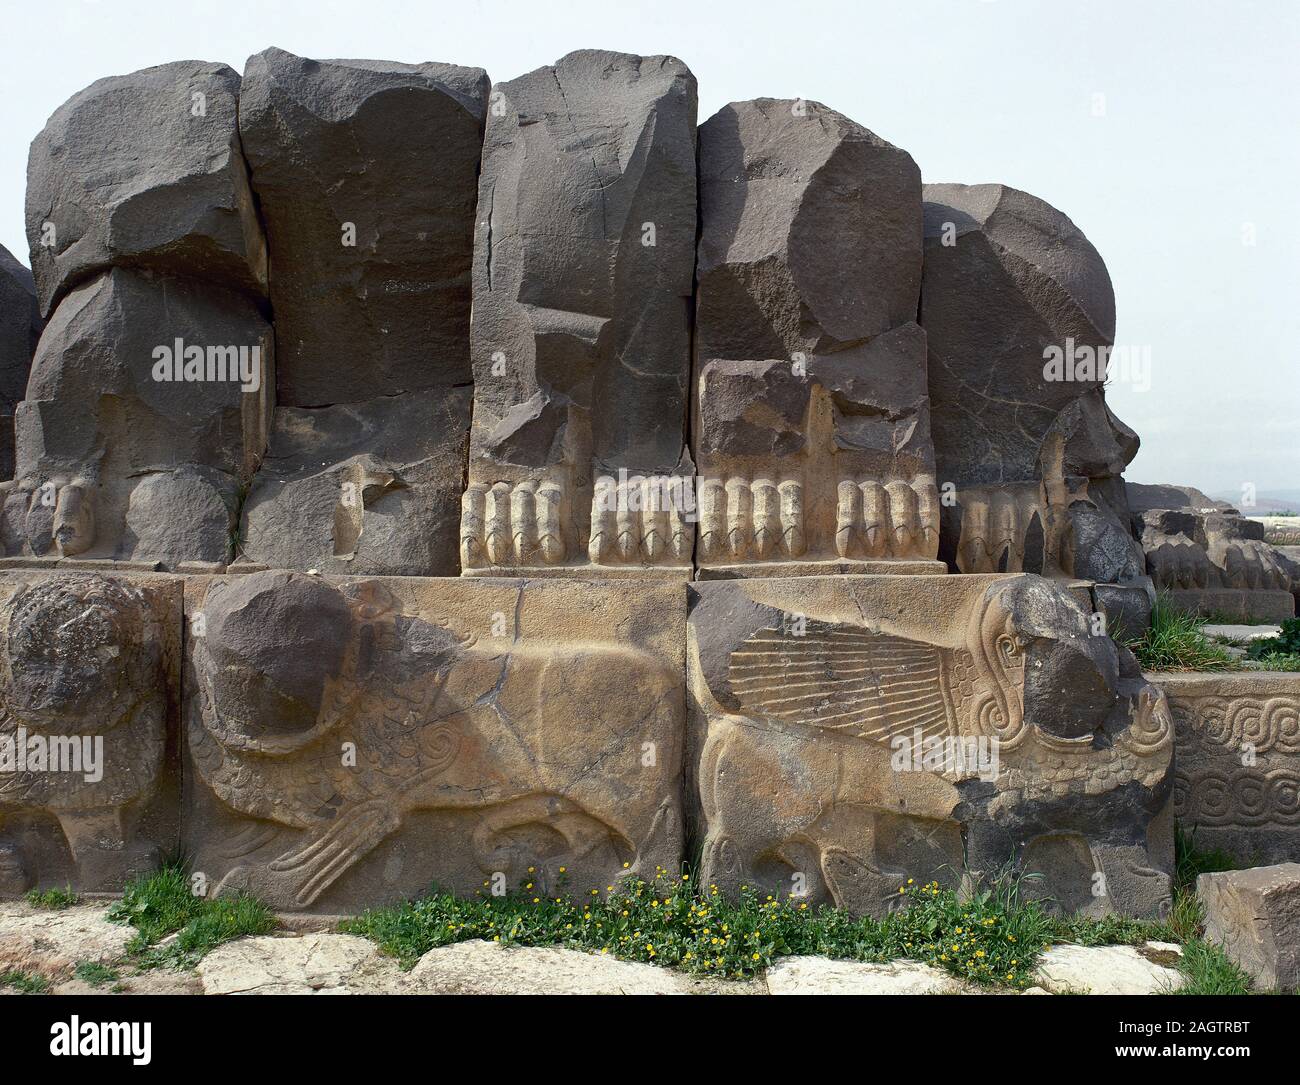 Syria, Ain Dara. Iron Age. Syro-Hittite temple, c. 1300 BC-740 BC. Basaltic stone plinth with Sphinx. Photo taken before the Syrian Civil War. The temple was significantly damaged by Turkish AIr Forces in 2018. Stock Photo